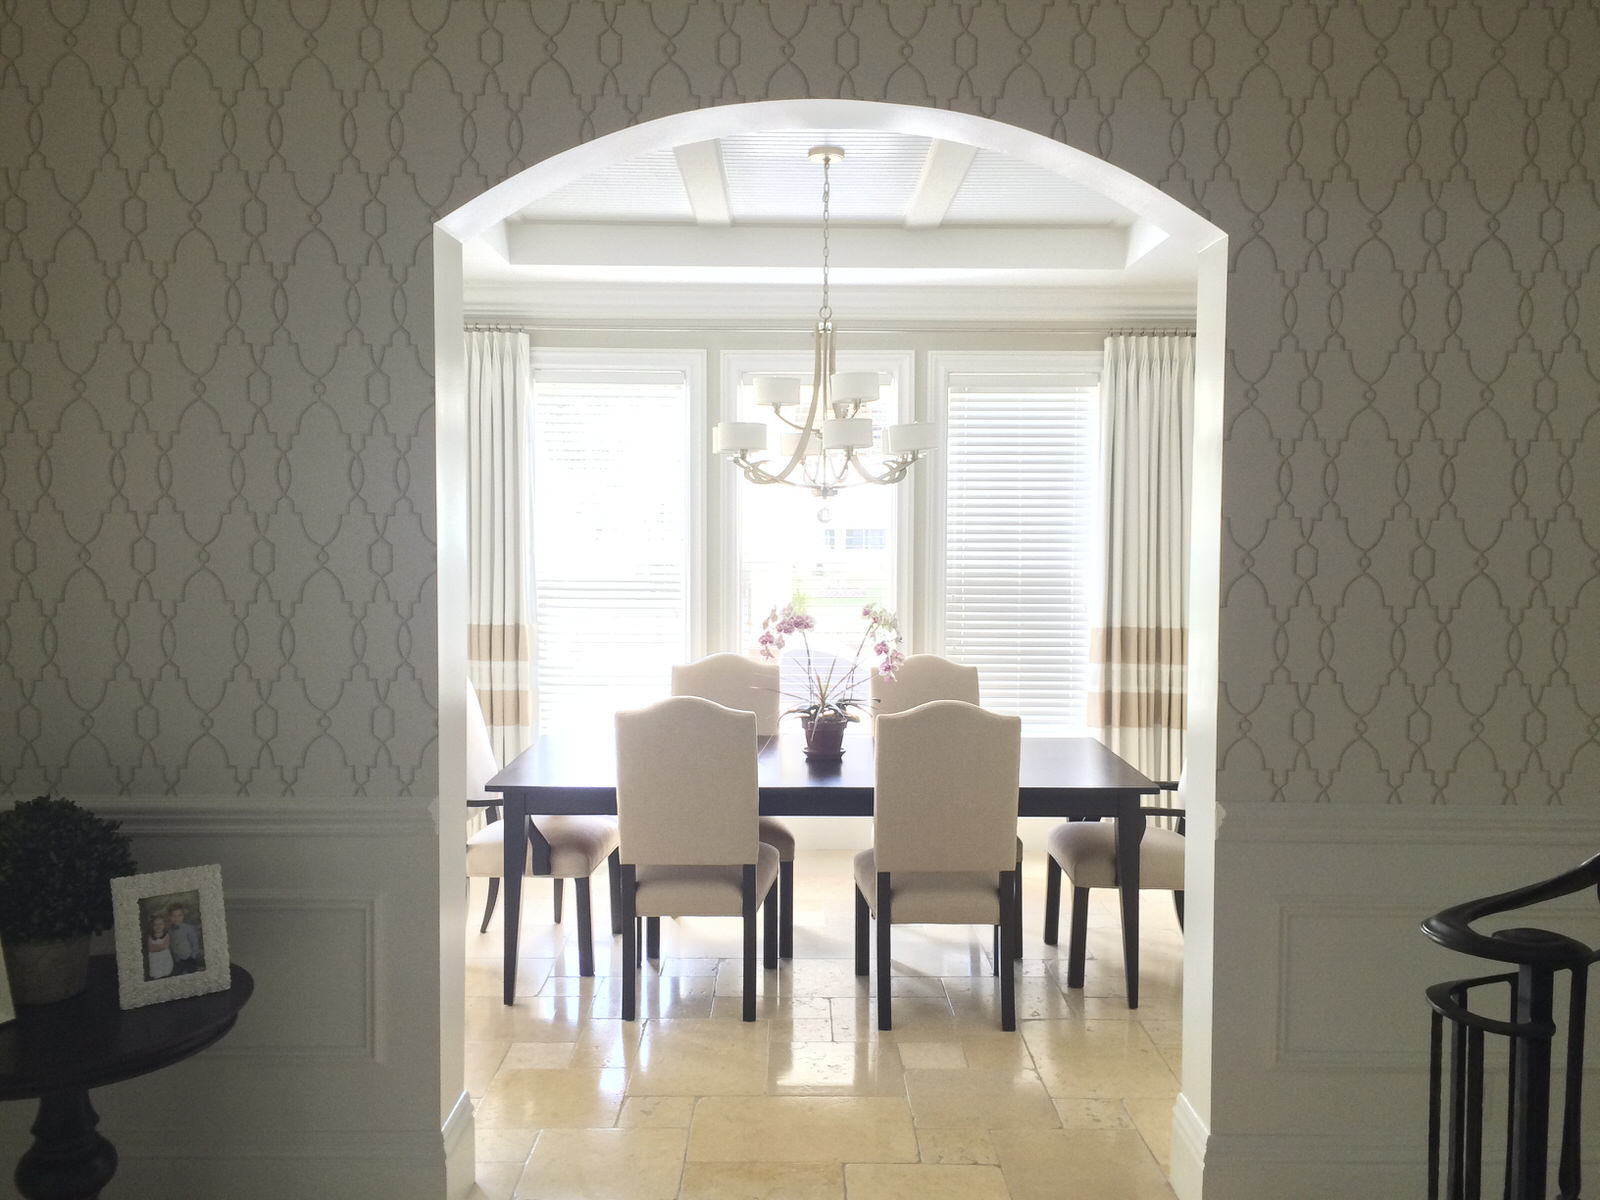 a peek into dining space with beautiful wallpaper